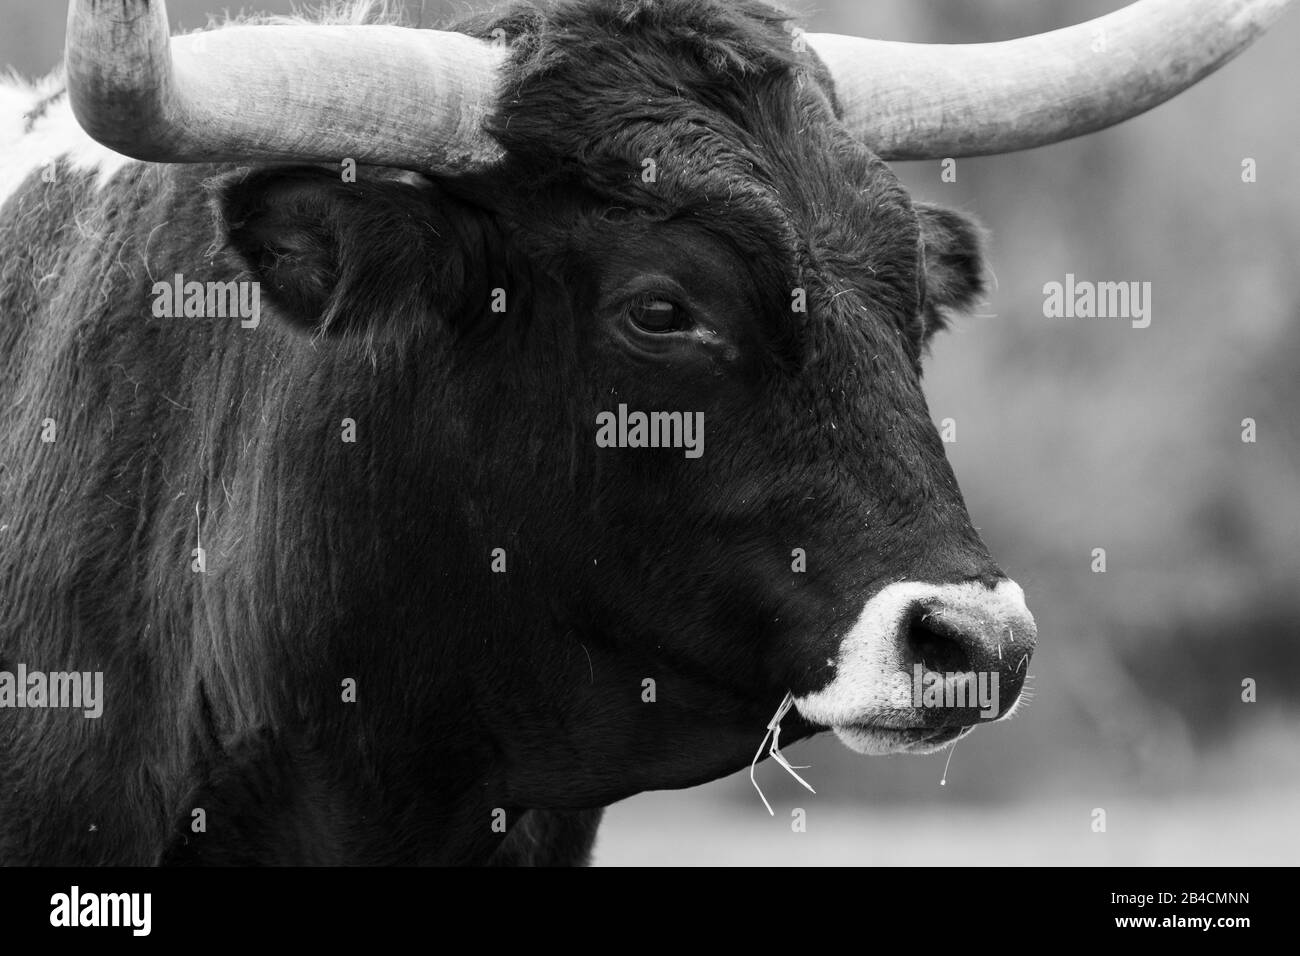 Closeup portrait of the head and face of a large, black Longhorn bull with a white muzzle and a tuft of orange hair on the top of his head and in his Stock Photo